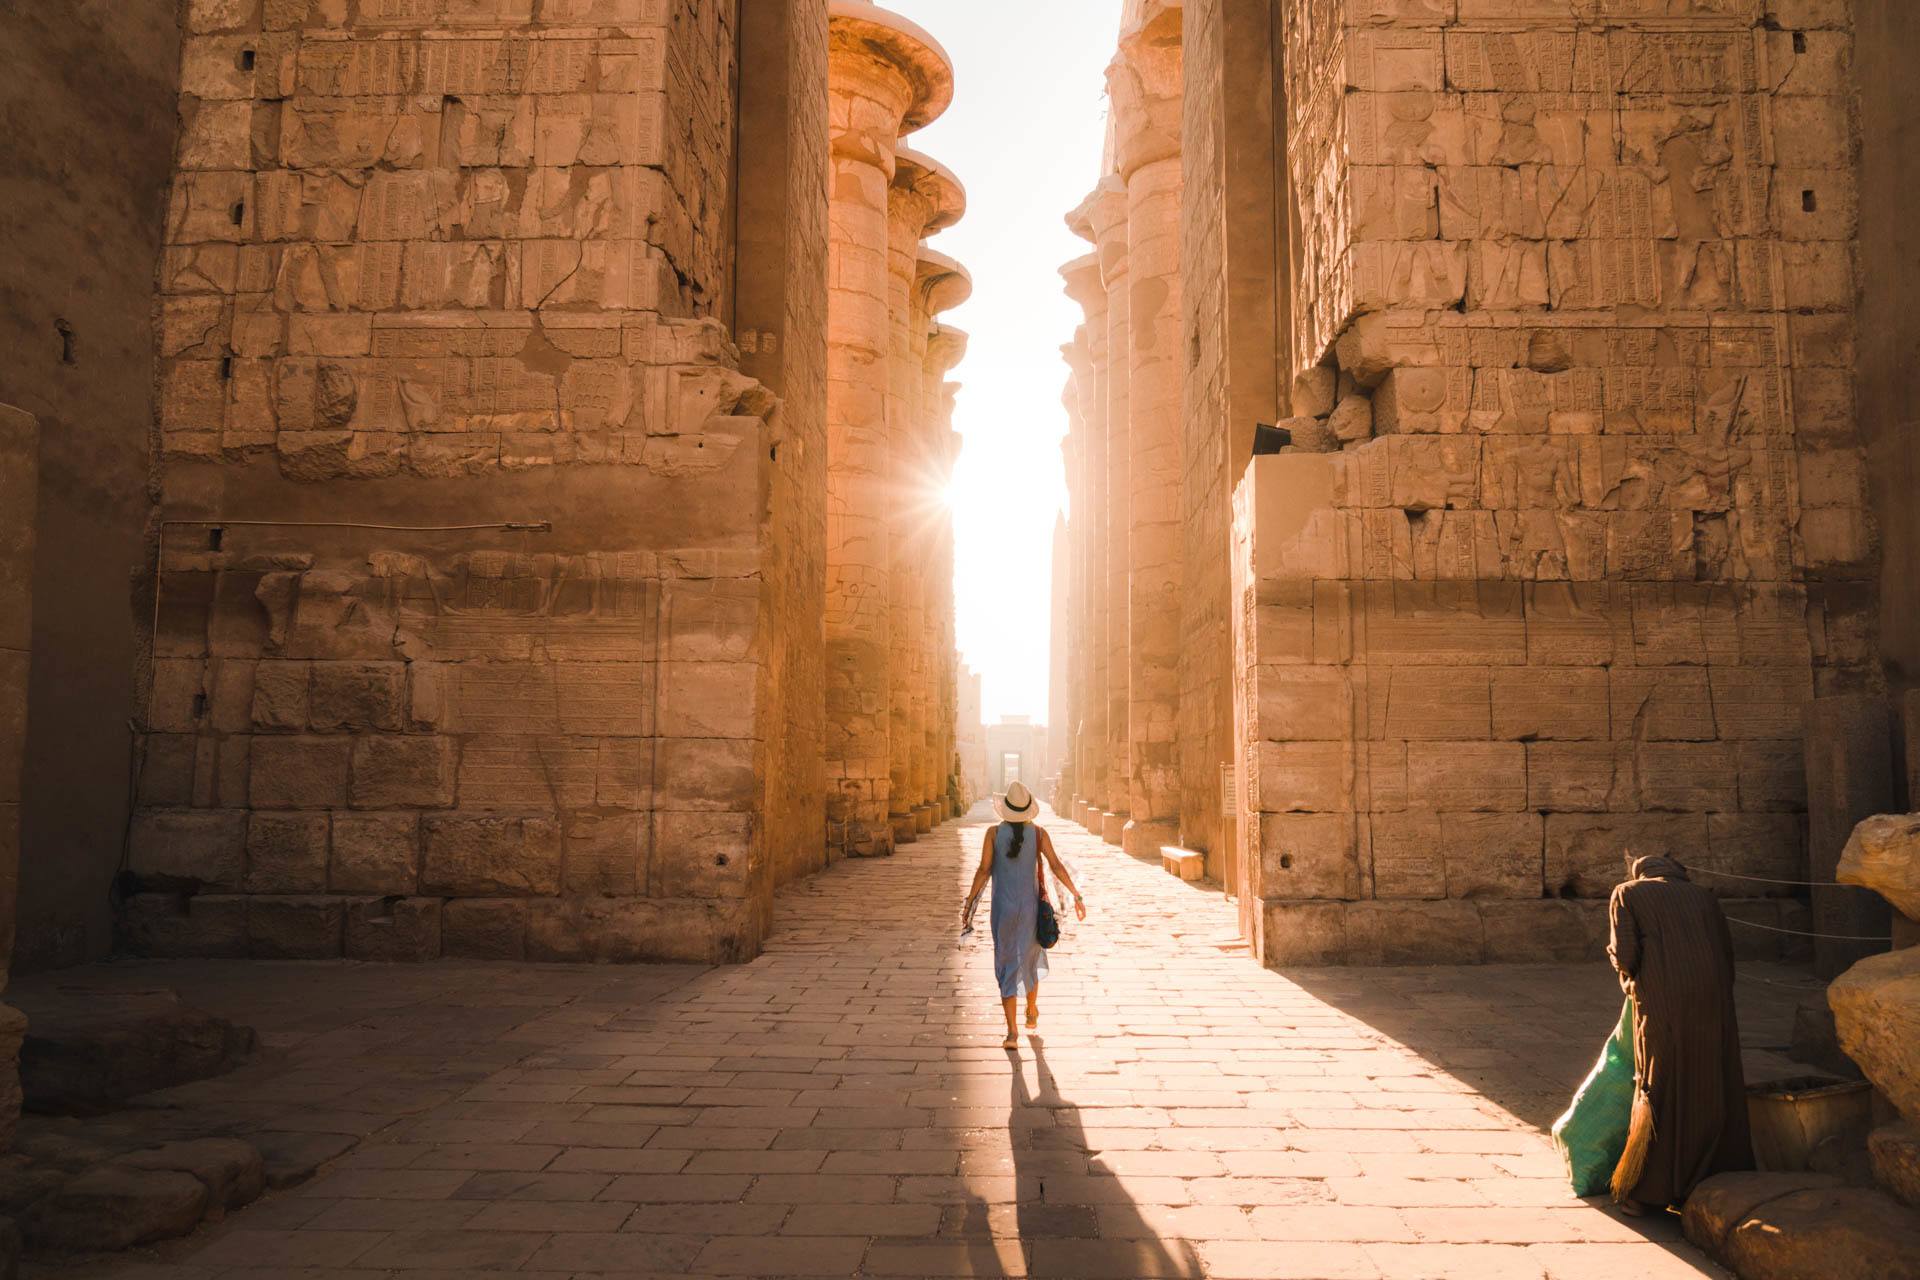 American tourist visiting Karnak Temple in Egypt after a reopening of tourism